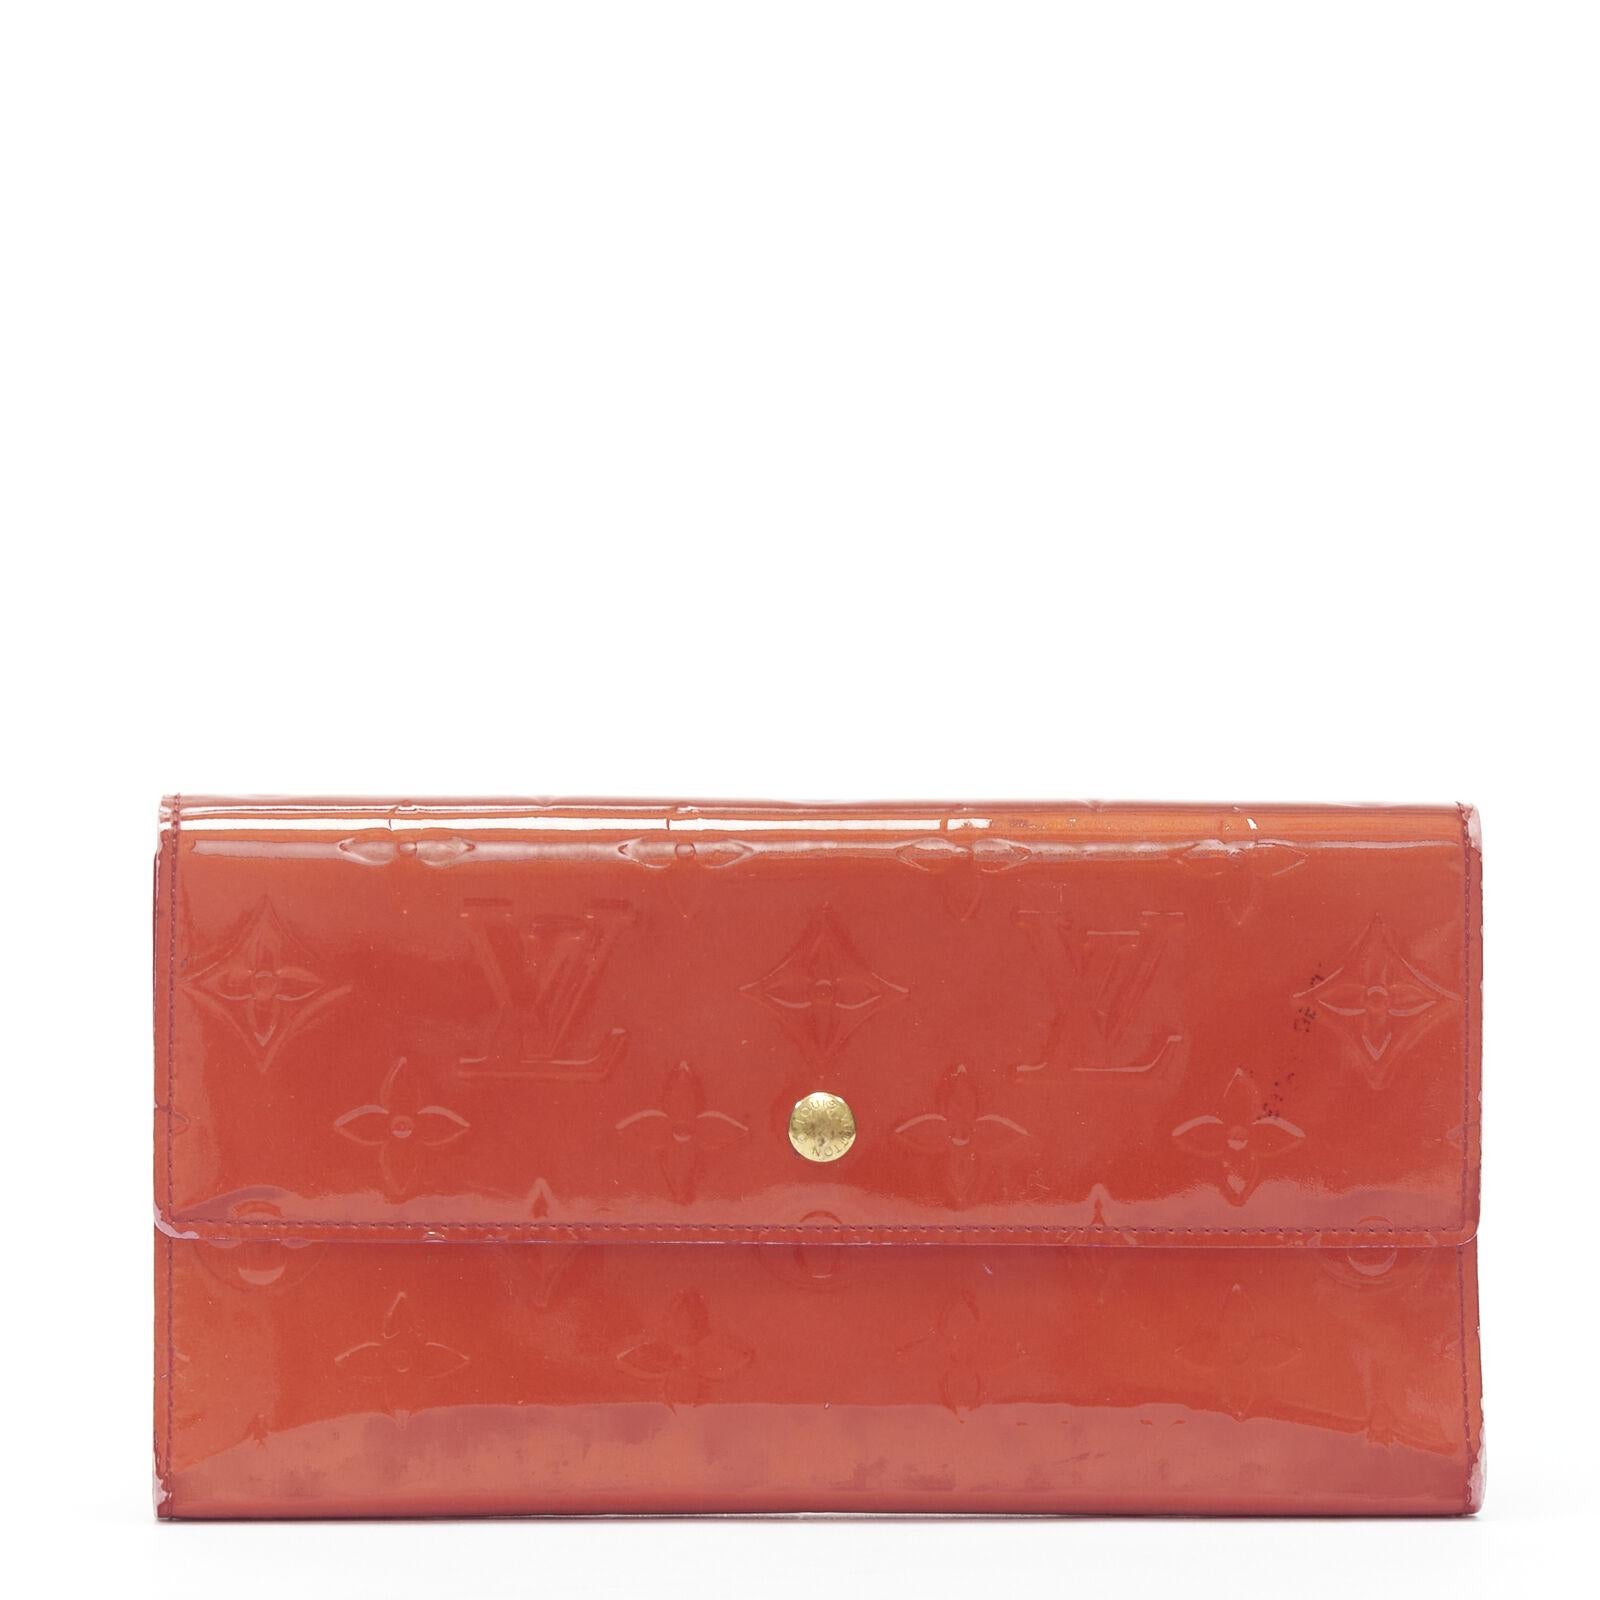 LOUIS VUITTON Vernis red patent LV logo emboss flap continental wallet For Sale 5